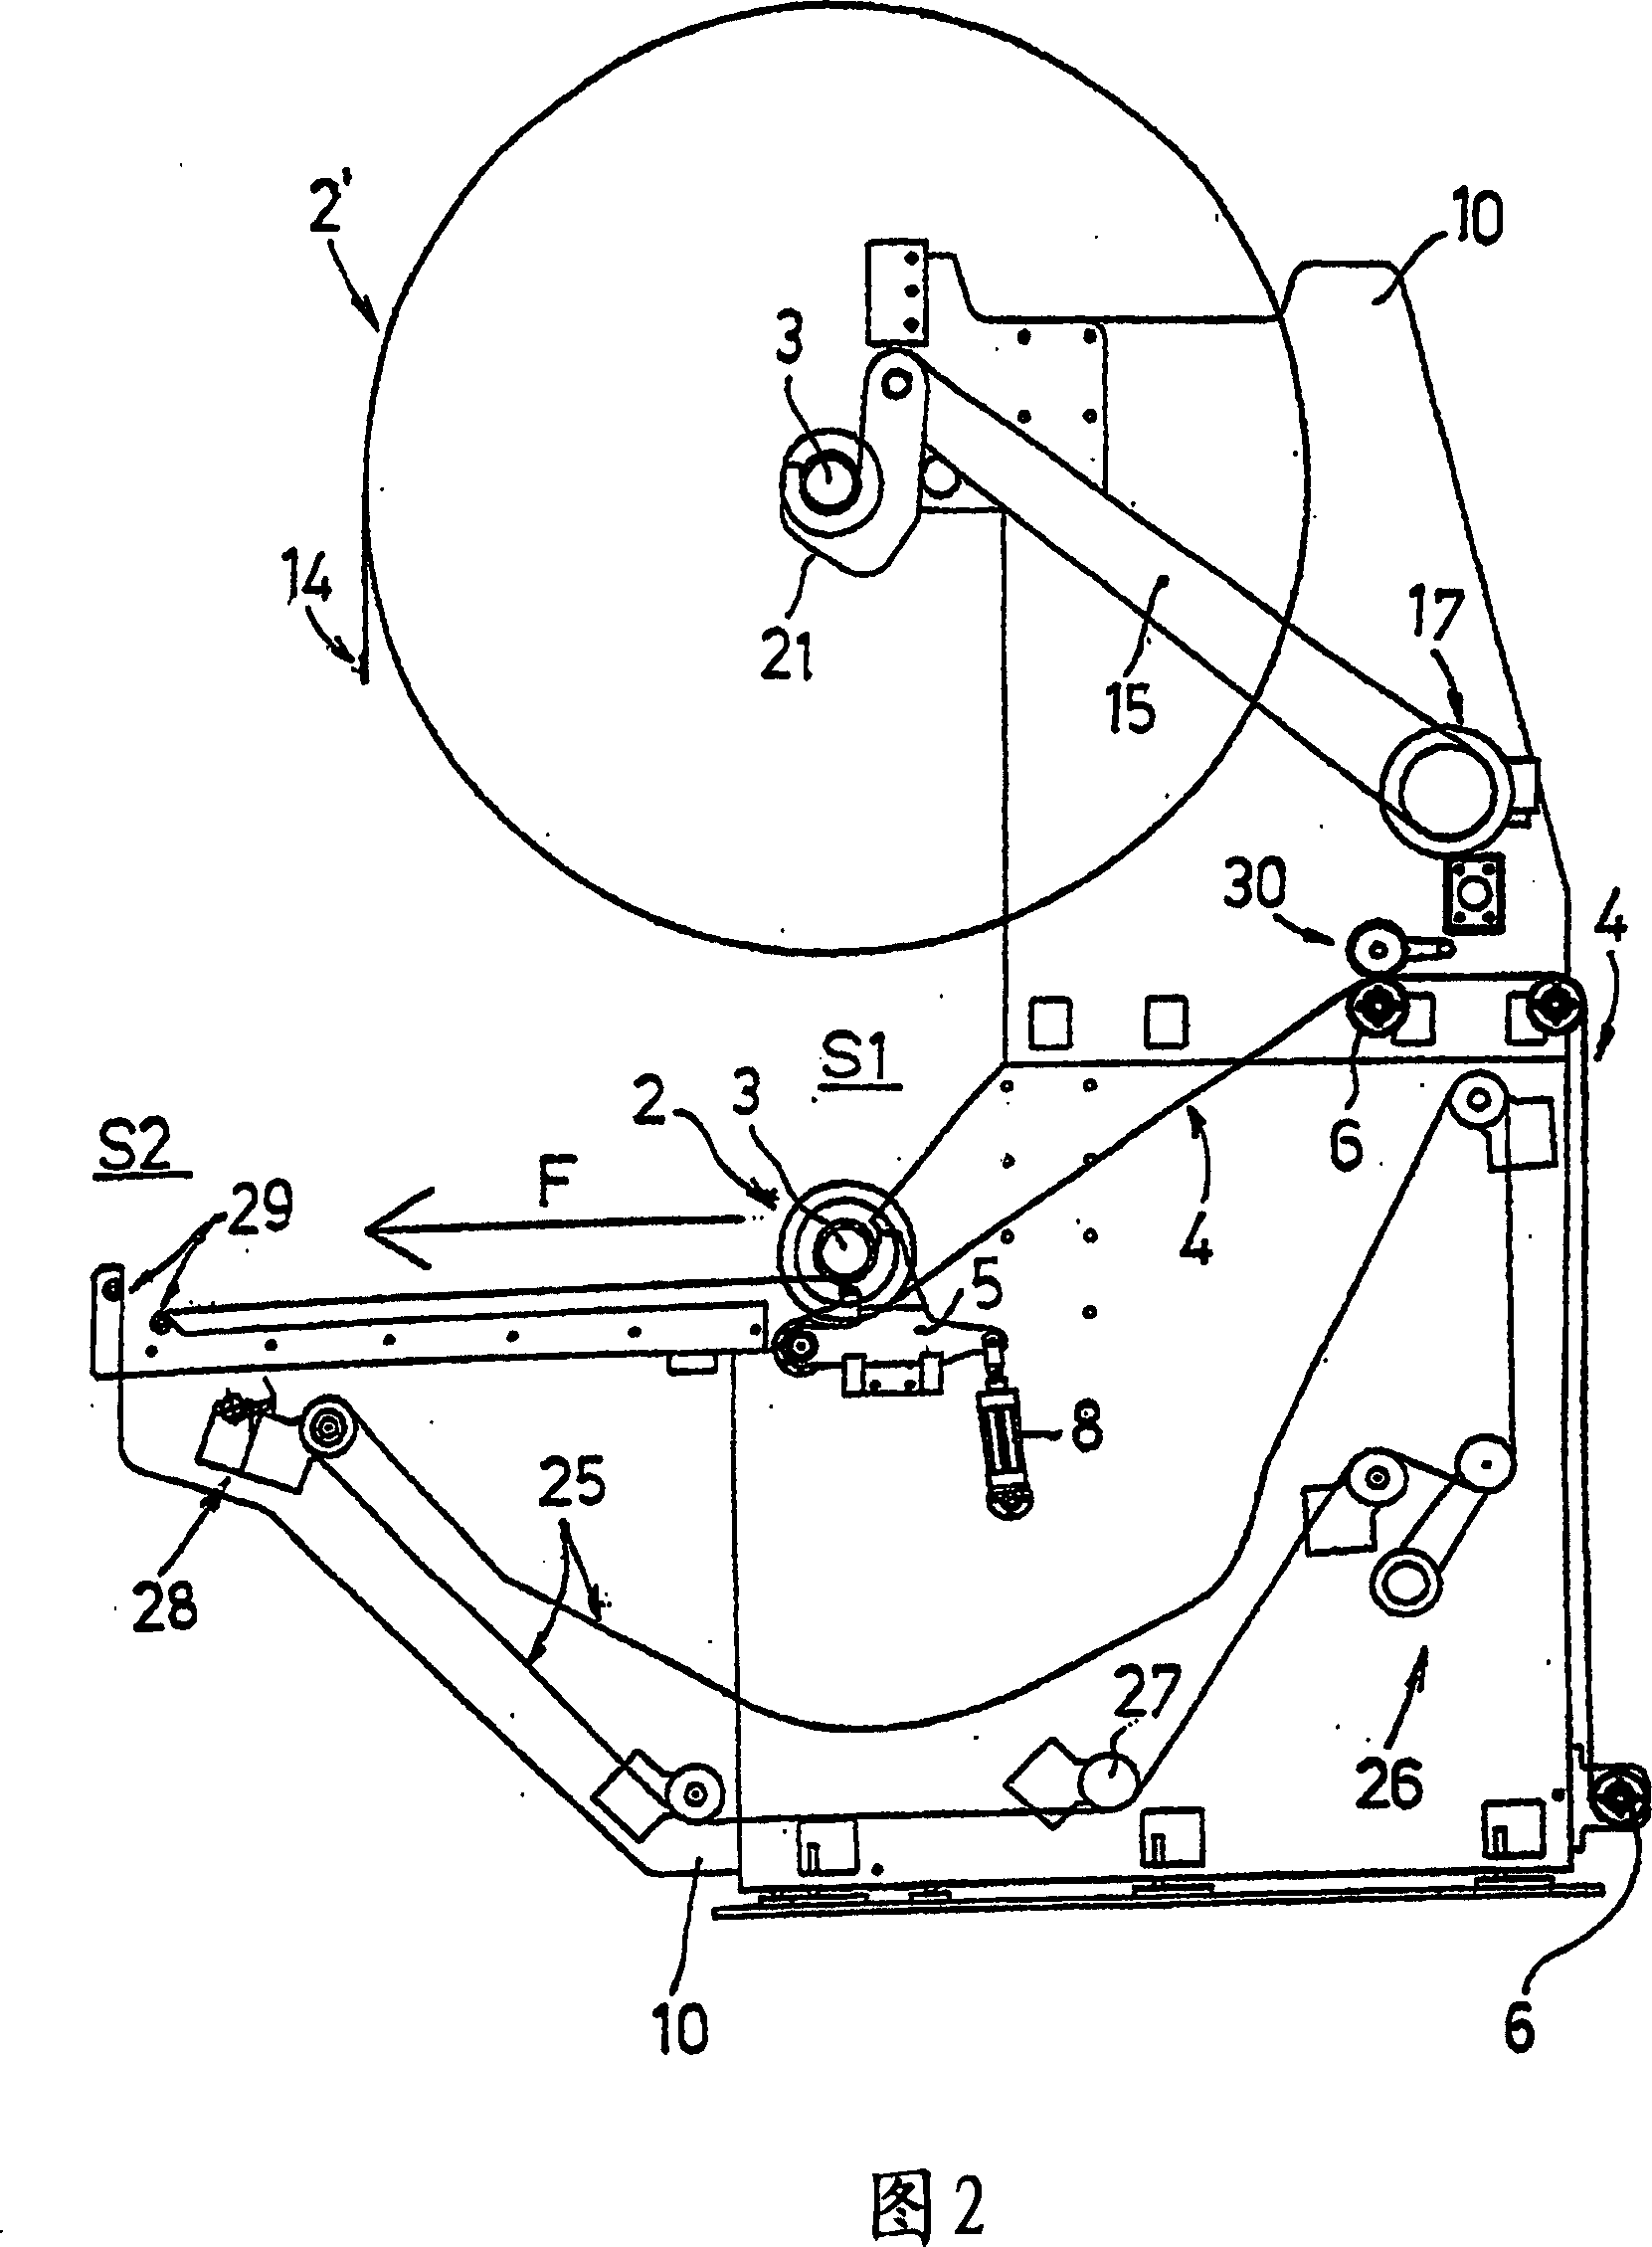 Device and method for changing the reel in an unwinder